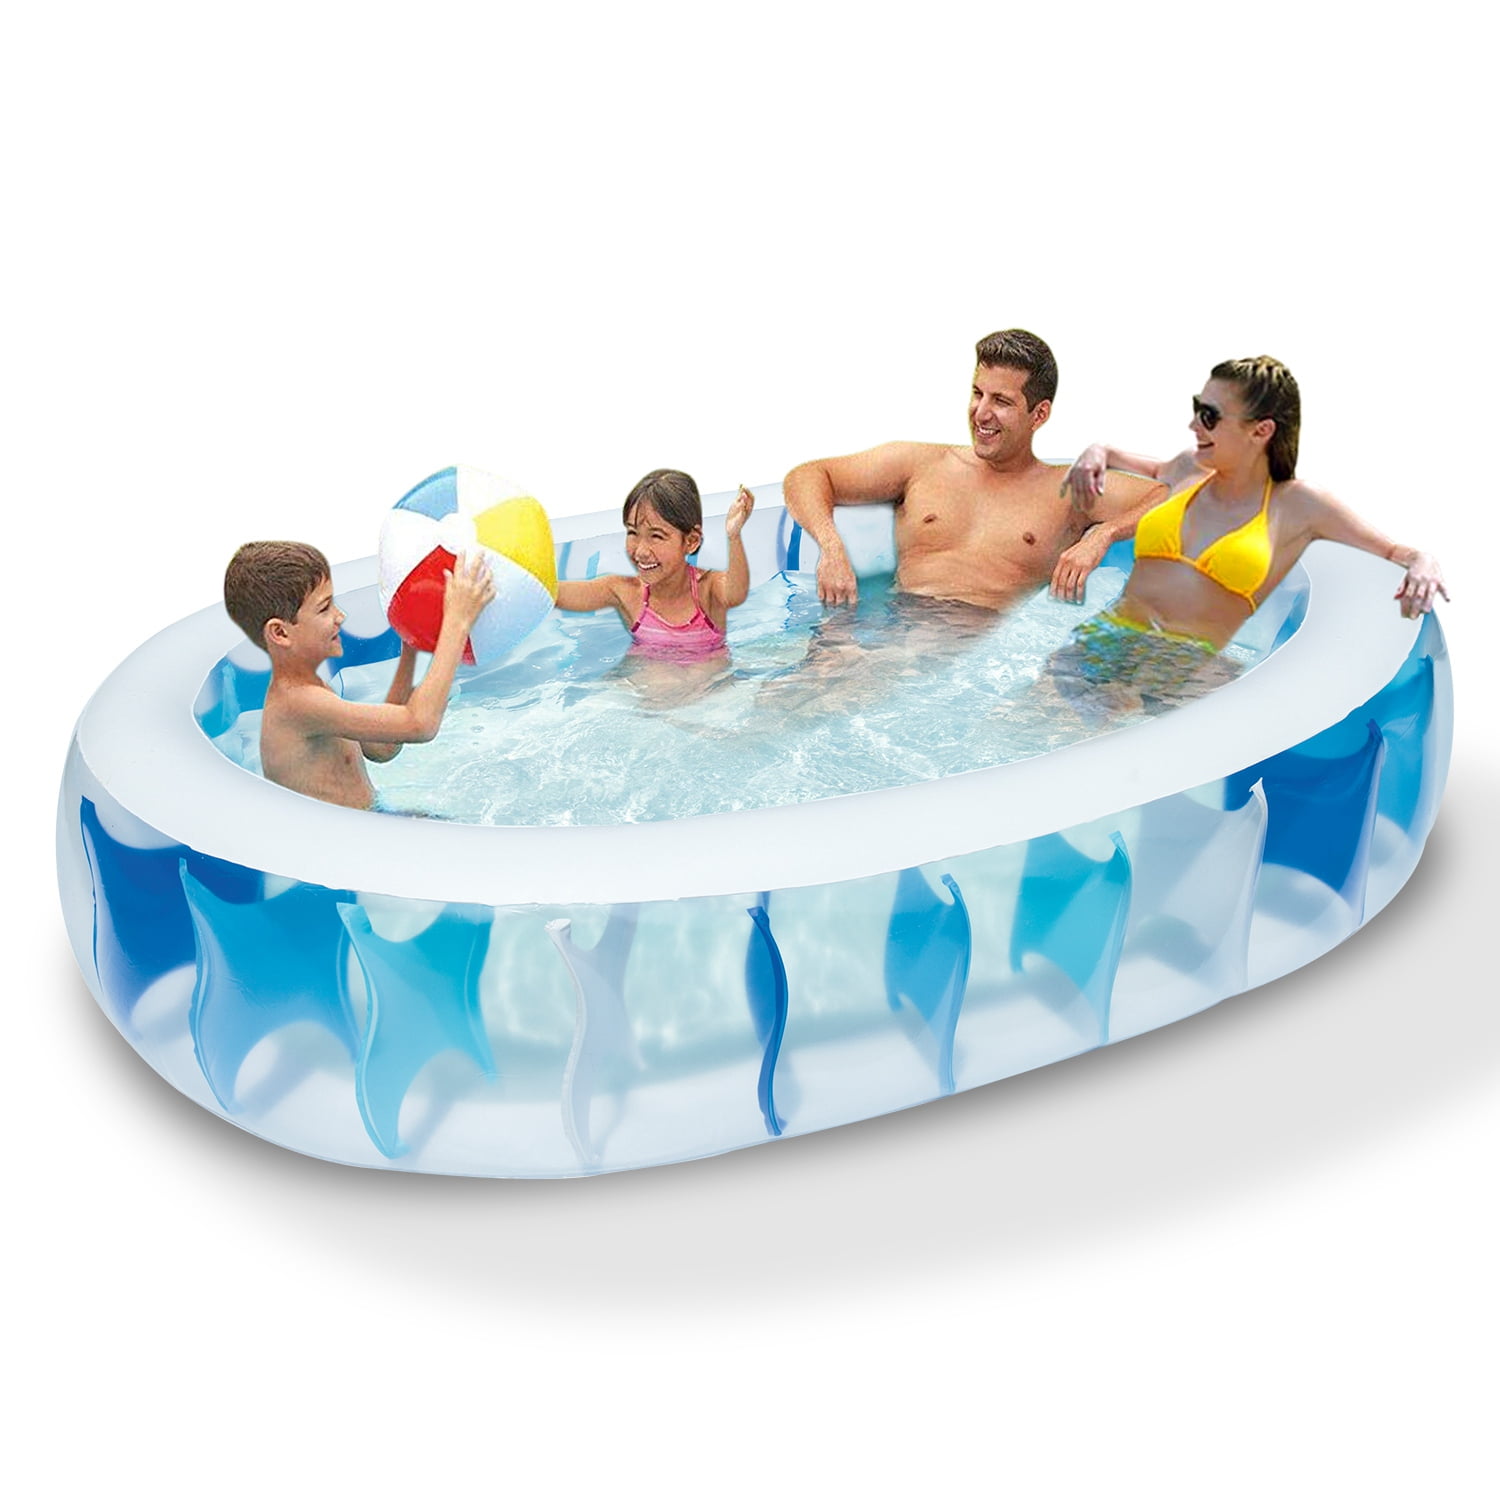 Details about   Pool Central 47" Inflatable Pink 3 Ring Donut Shaped Kiddie Swimming Pool 